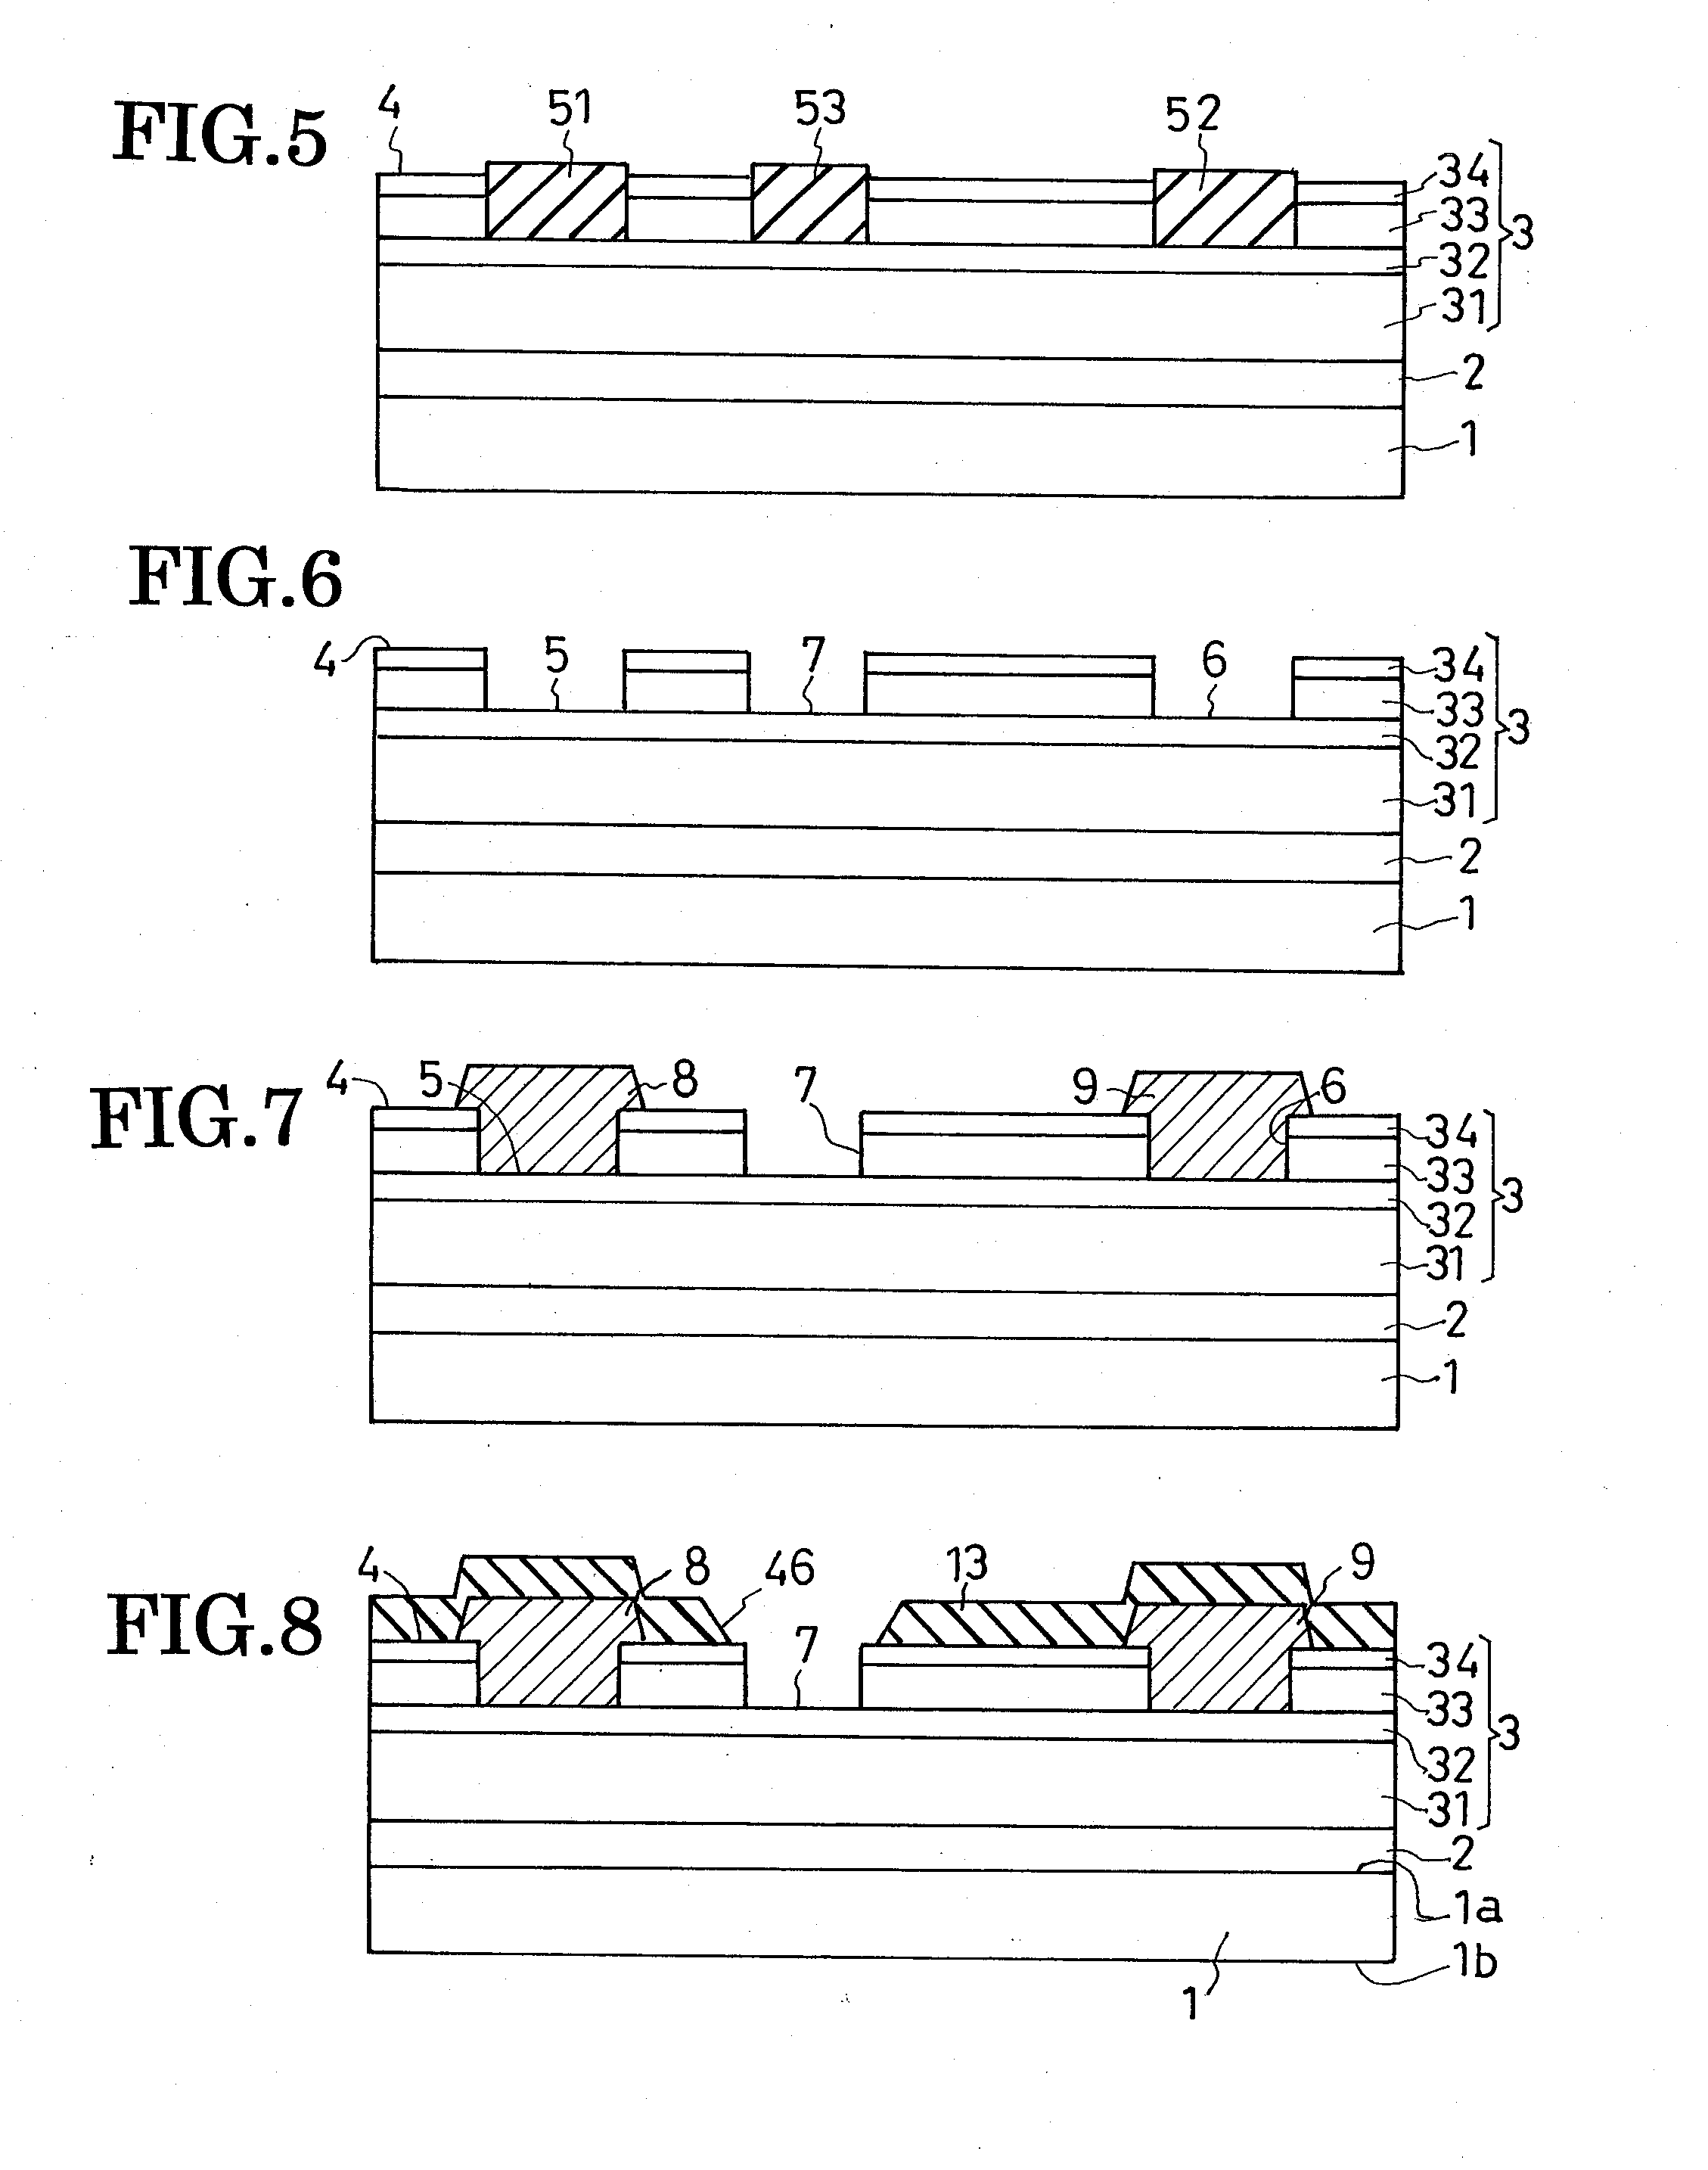 Field-effect semiconductor device, and method of fabrication